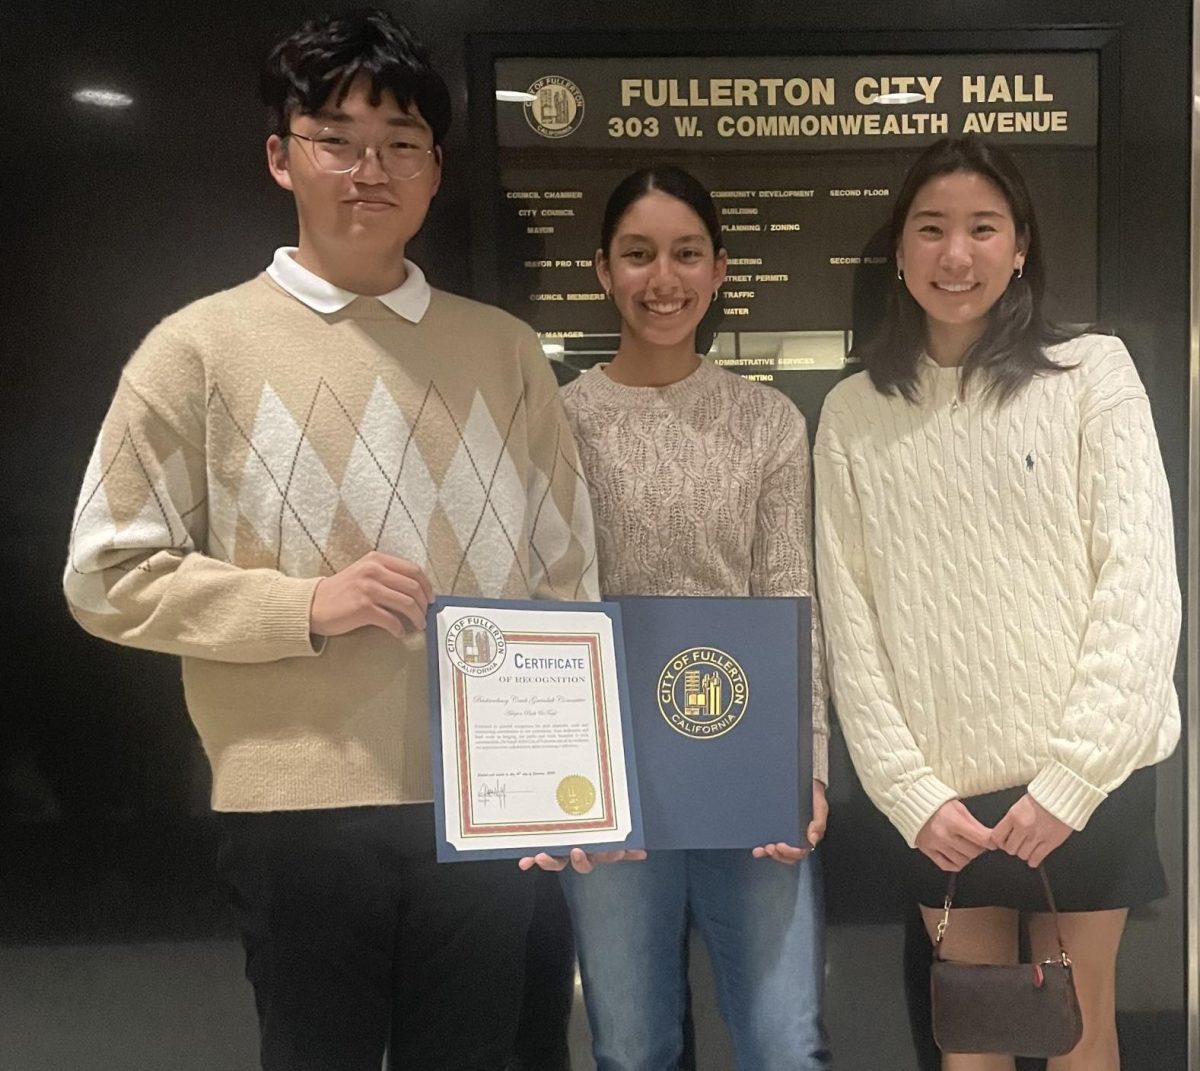 Girls tennis player junior Daniela Borruel (center) received her certificate of recognition alongside her two Sunny Hills classmates, who were also in attendance to receive their own certificates for being Adopt-A-Park volunteers, from the Fullerton City Council in City Hall on Tuesday, Jan. 16.